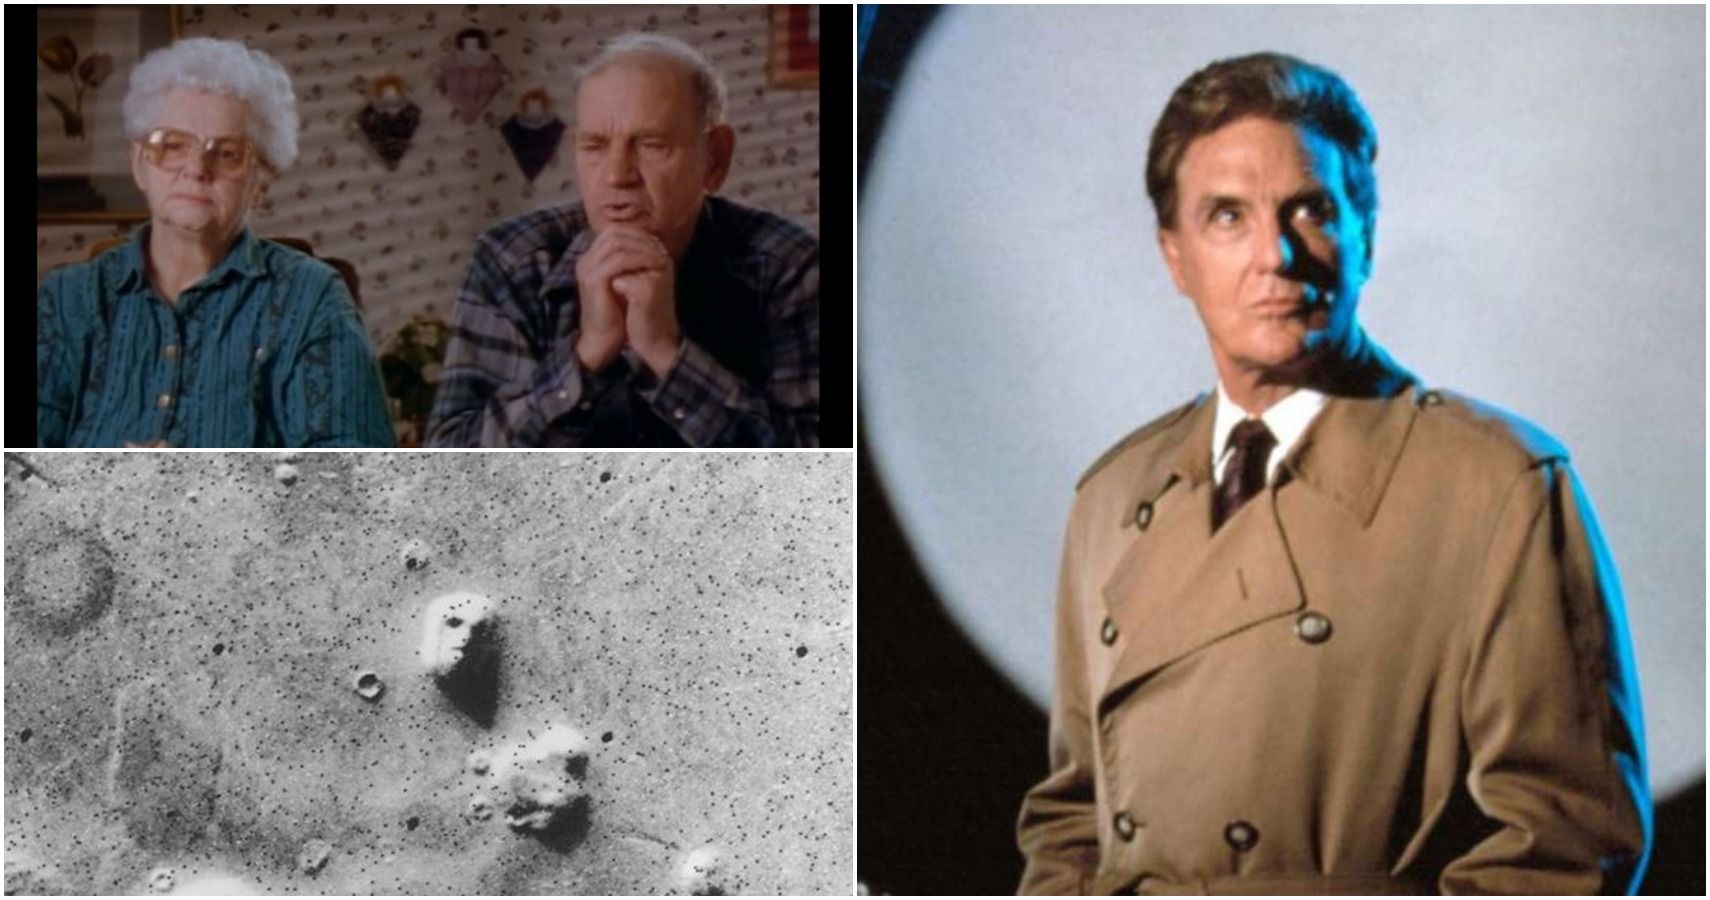 Unsolved Mysteries The 5 Most Disturbing Real Cases From The Original Series (& 5 That Were Actually Fake)